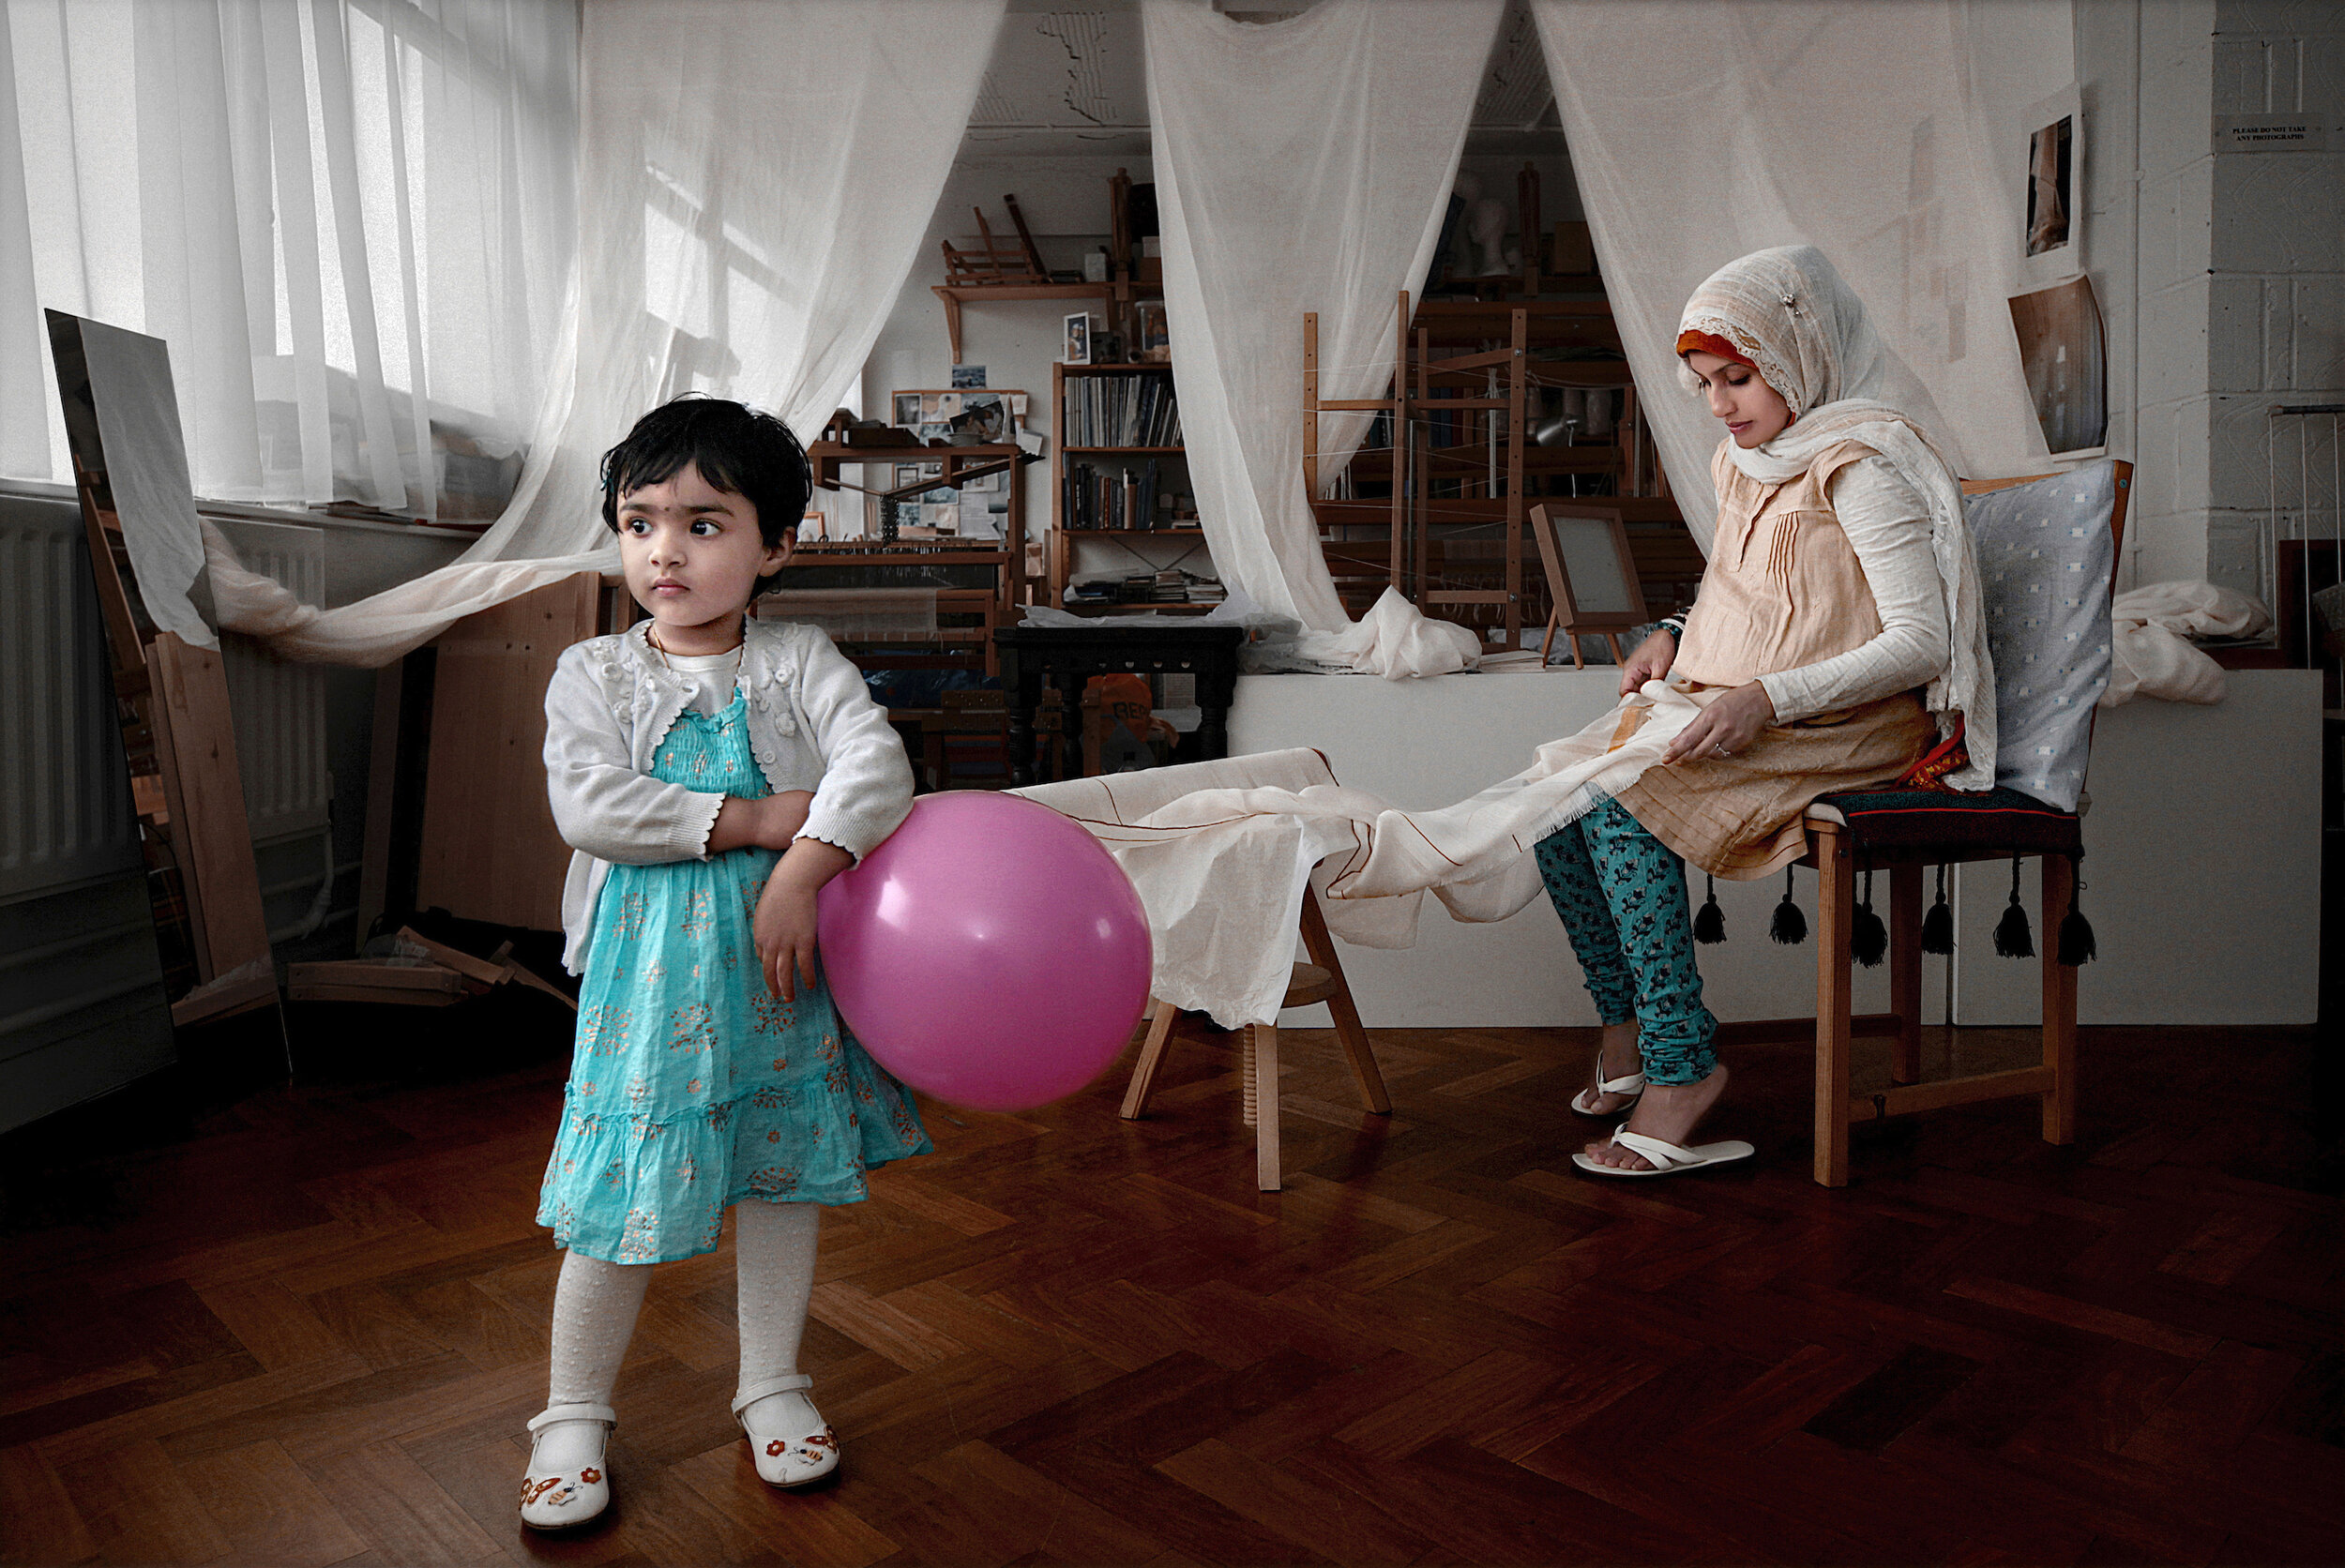   UK. London. 2011. Rezia Halima Wahid [right] and her 3-year old daughter, Noorie, at Rezia's studio. Rezia is a textile artist and creates hand-woven textiles. Rezia said, “Islam is a part of me, my existence, but my spirituality is something very 